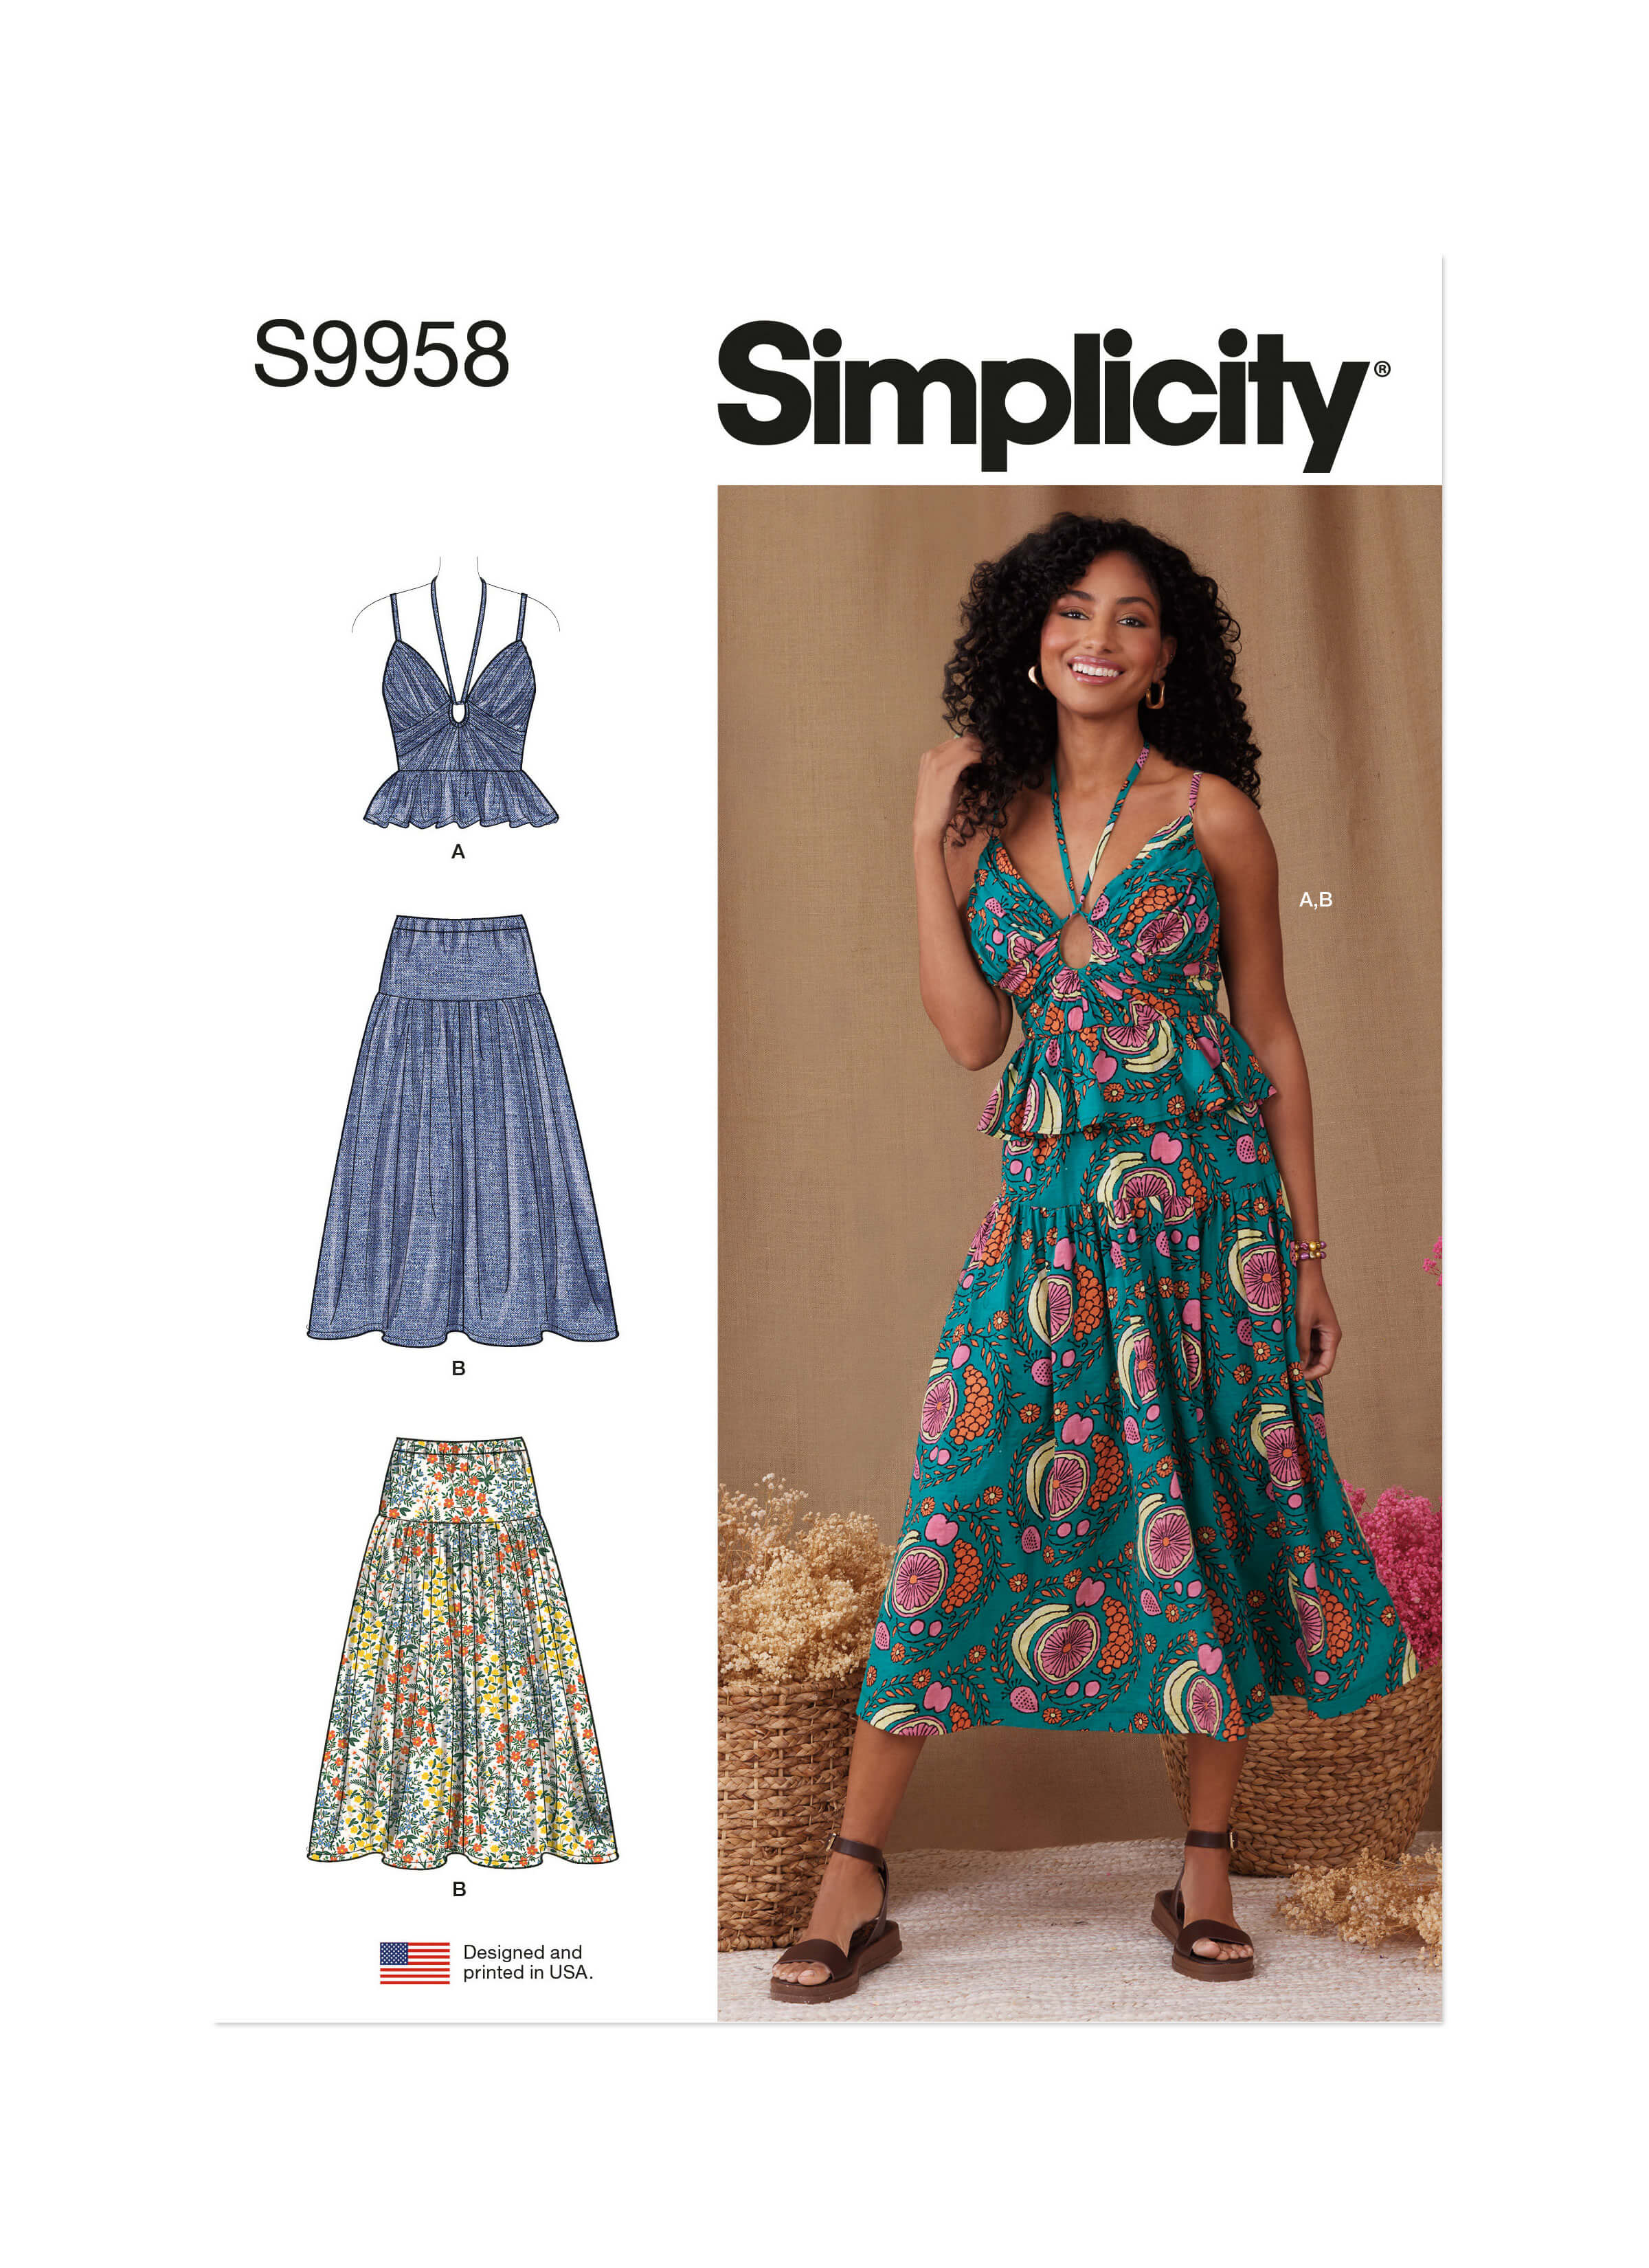 Simplicity Sewing Pattern S9958 Misses' Top and Skirt